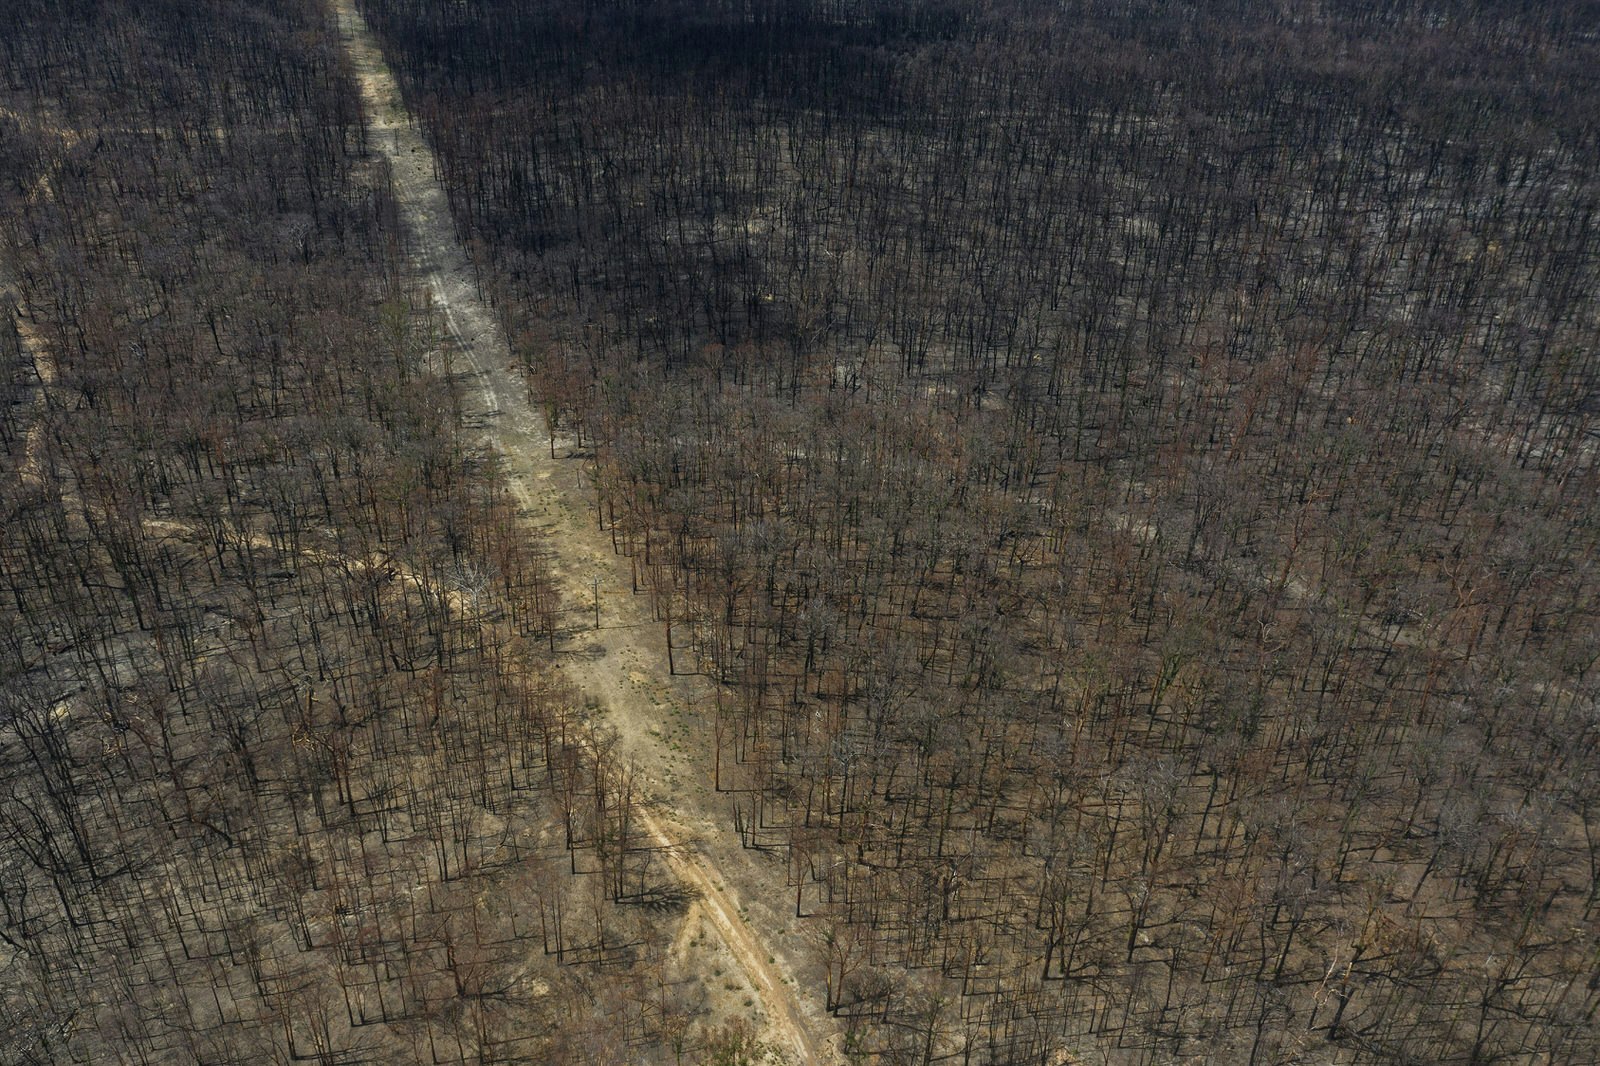 An area of forest devastated by bushfires in Australia